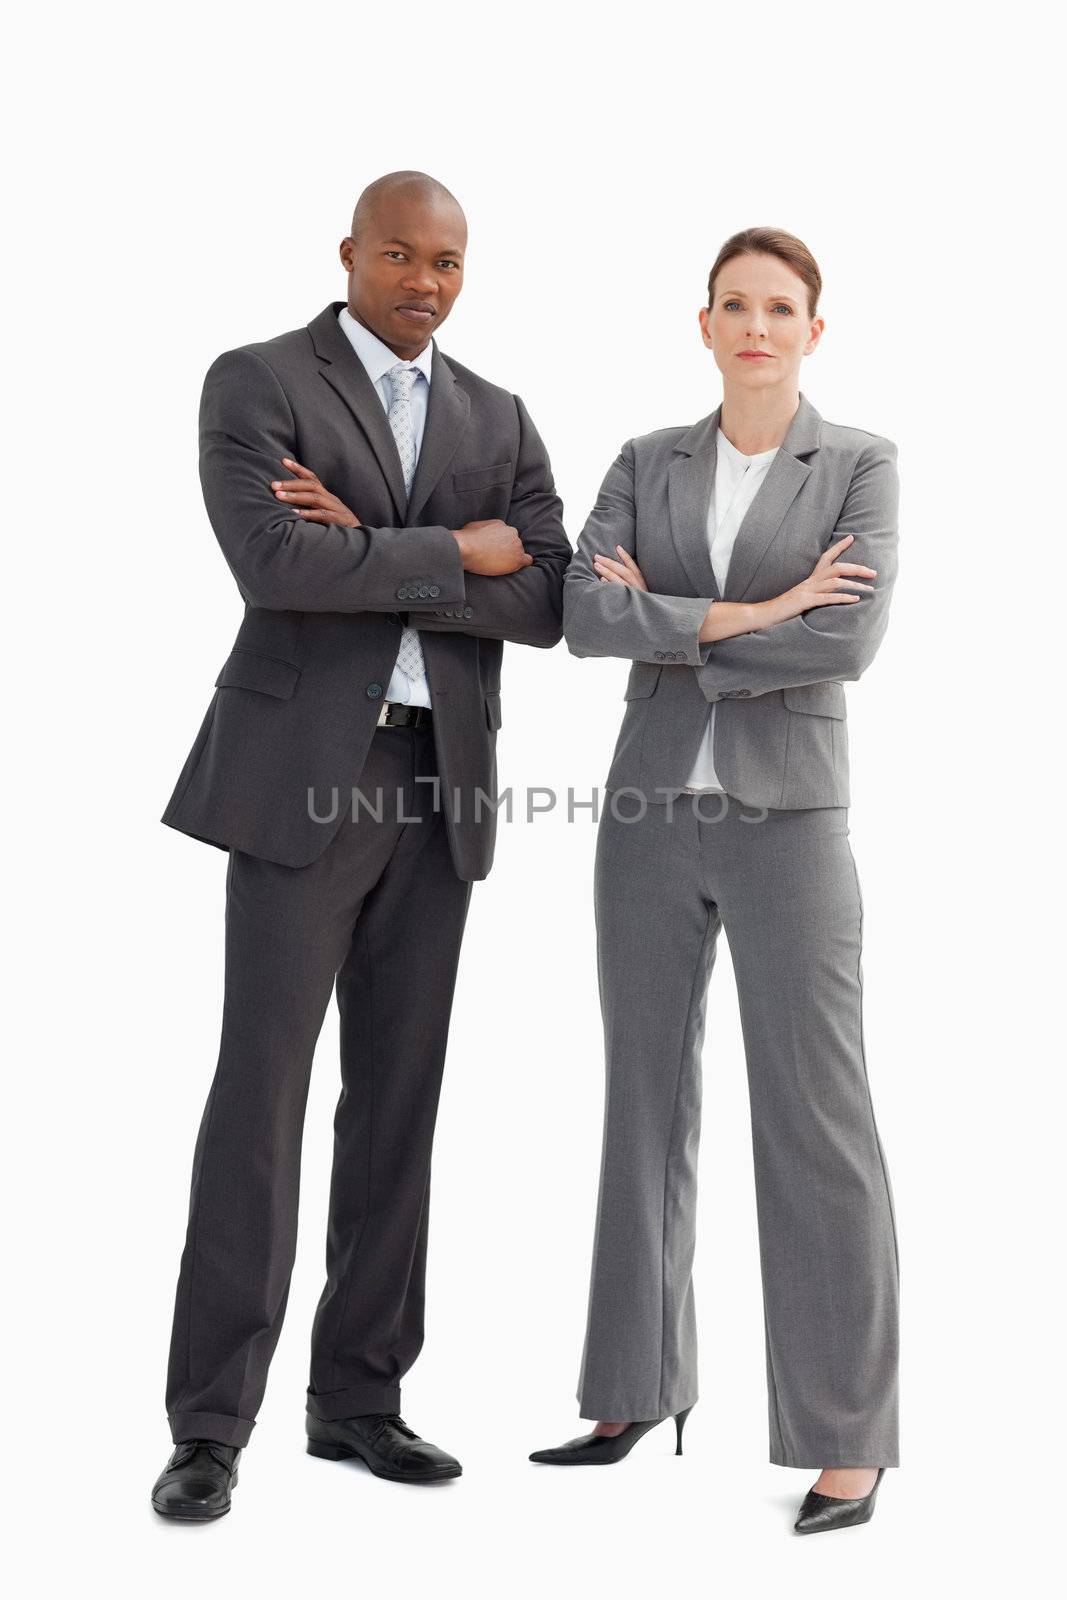 A business man and woman with their hands crossed